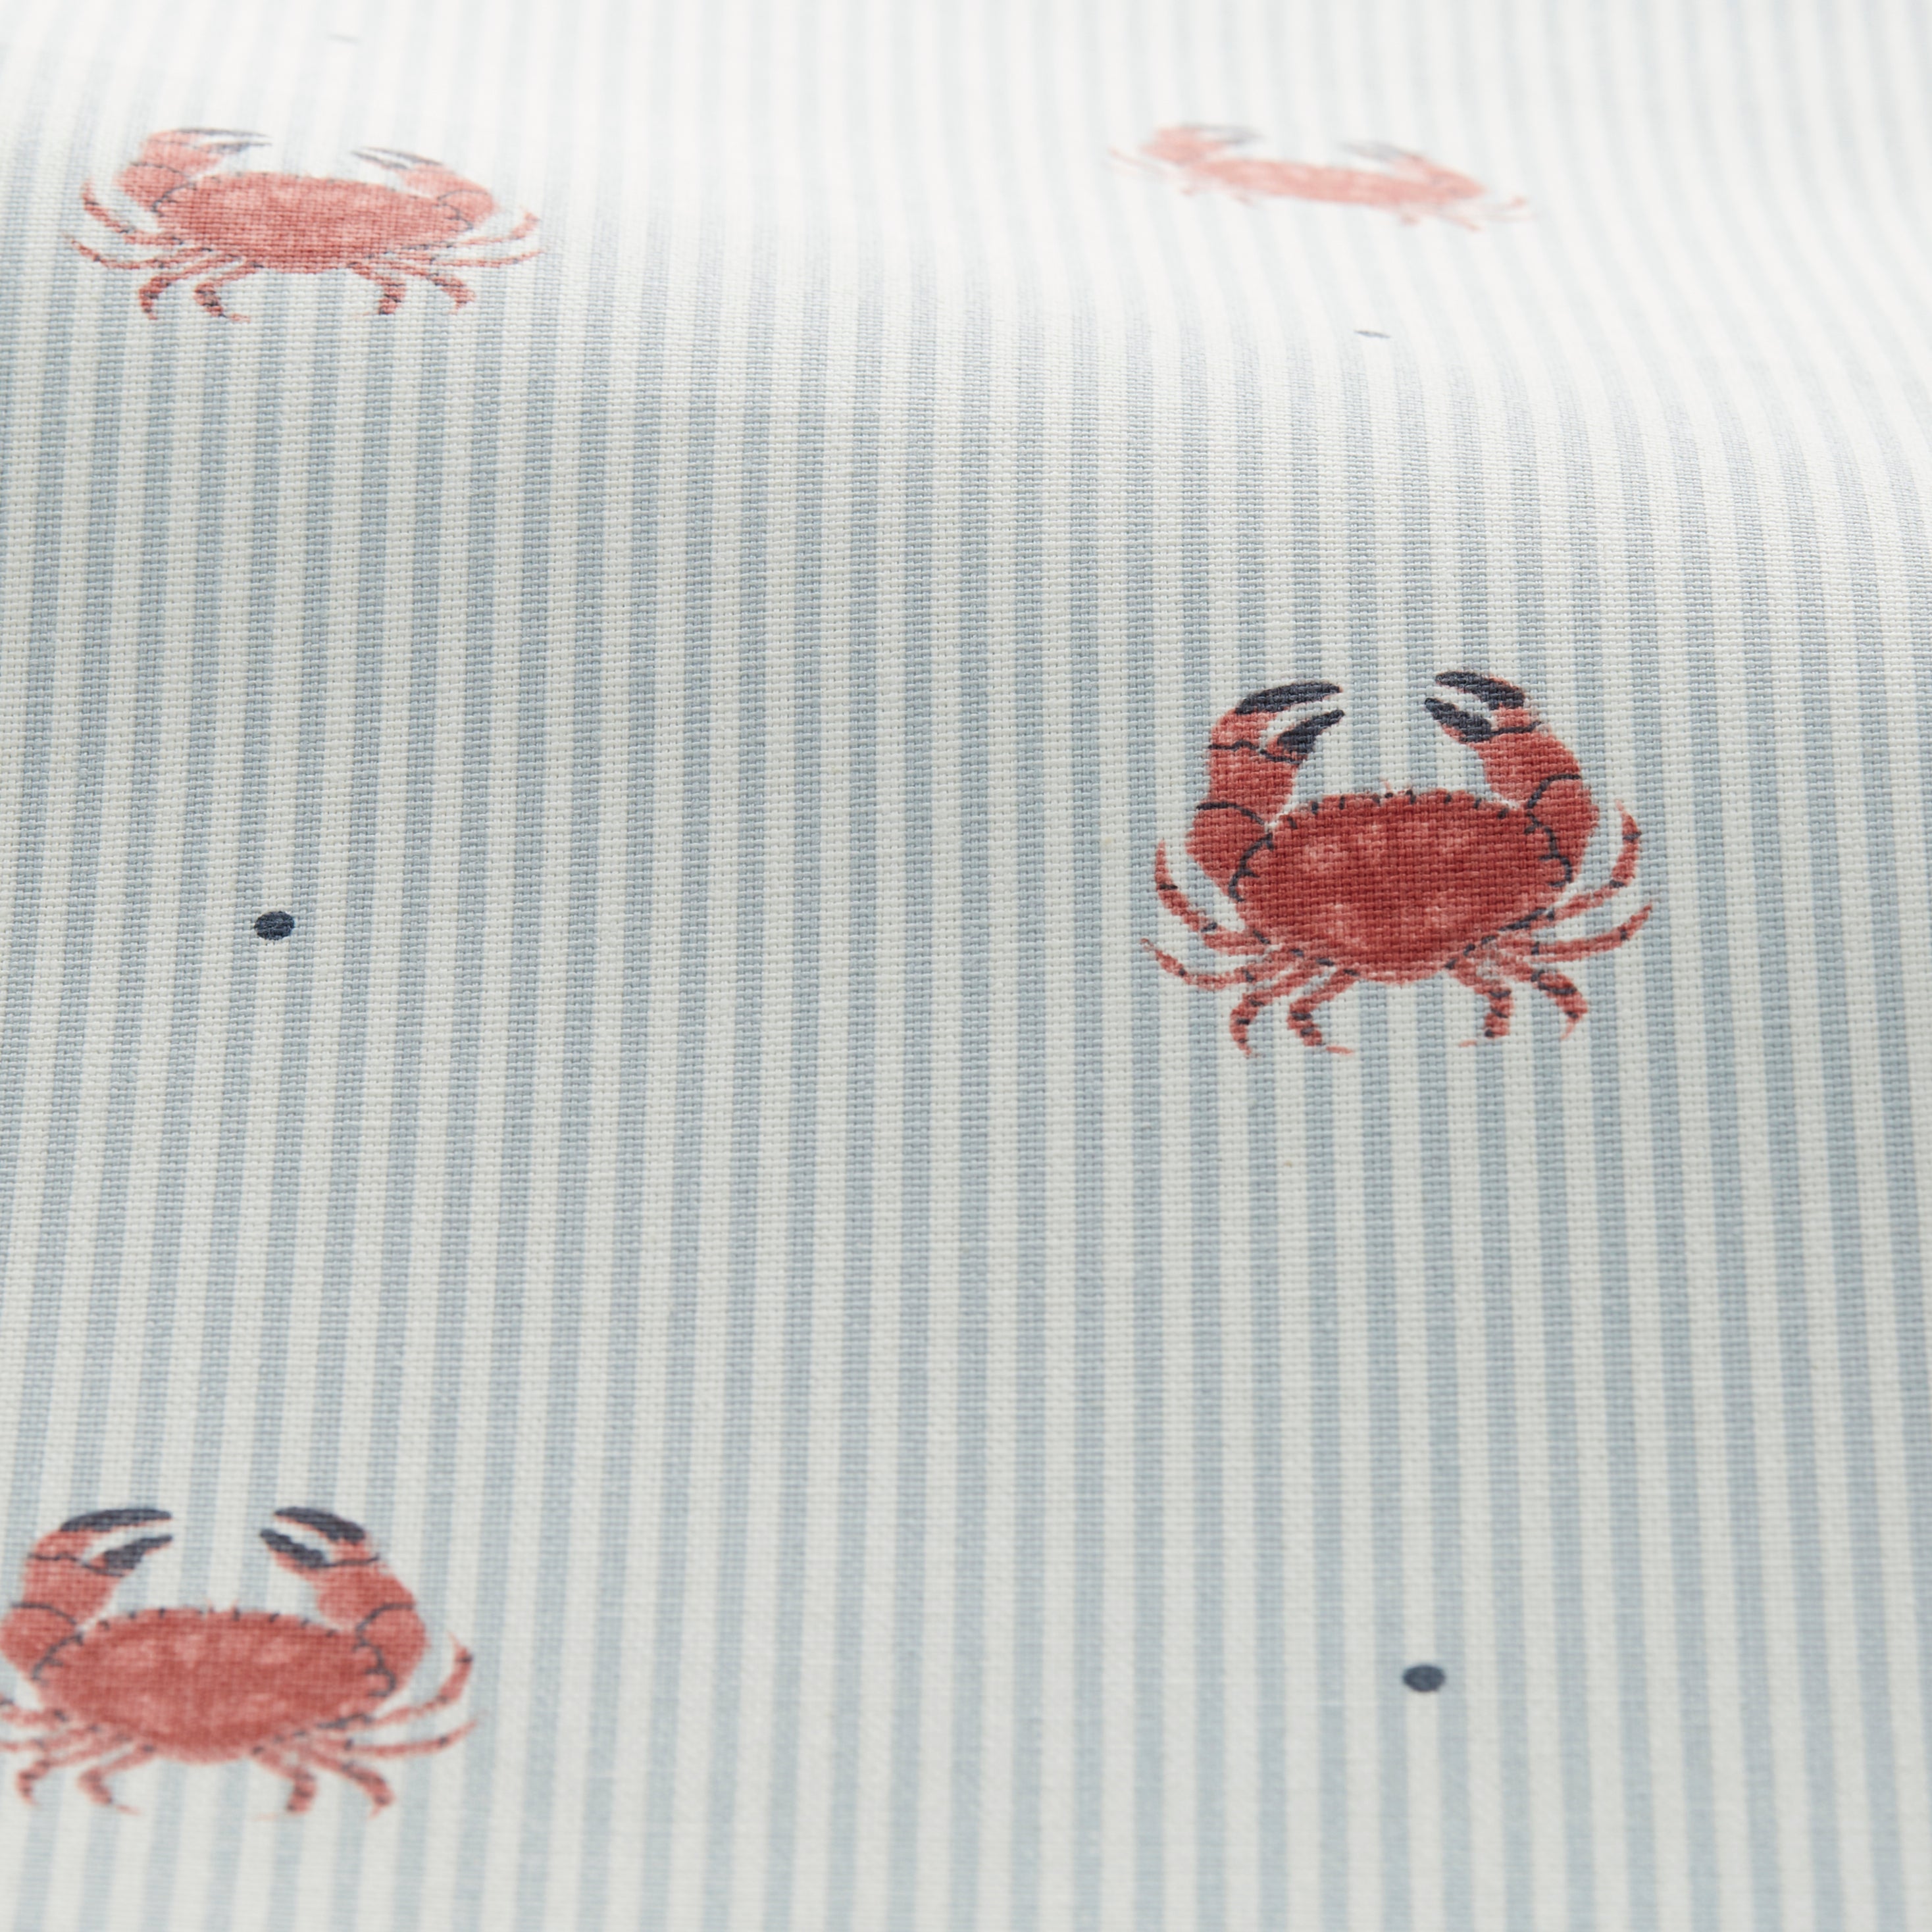 Rockpool Crab Made to Order Cushion Cover Rockpool Red